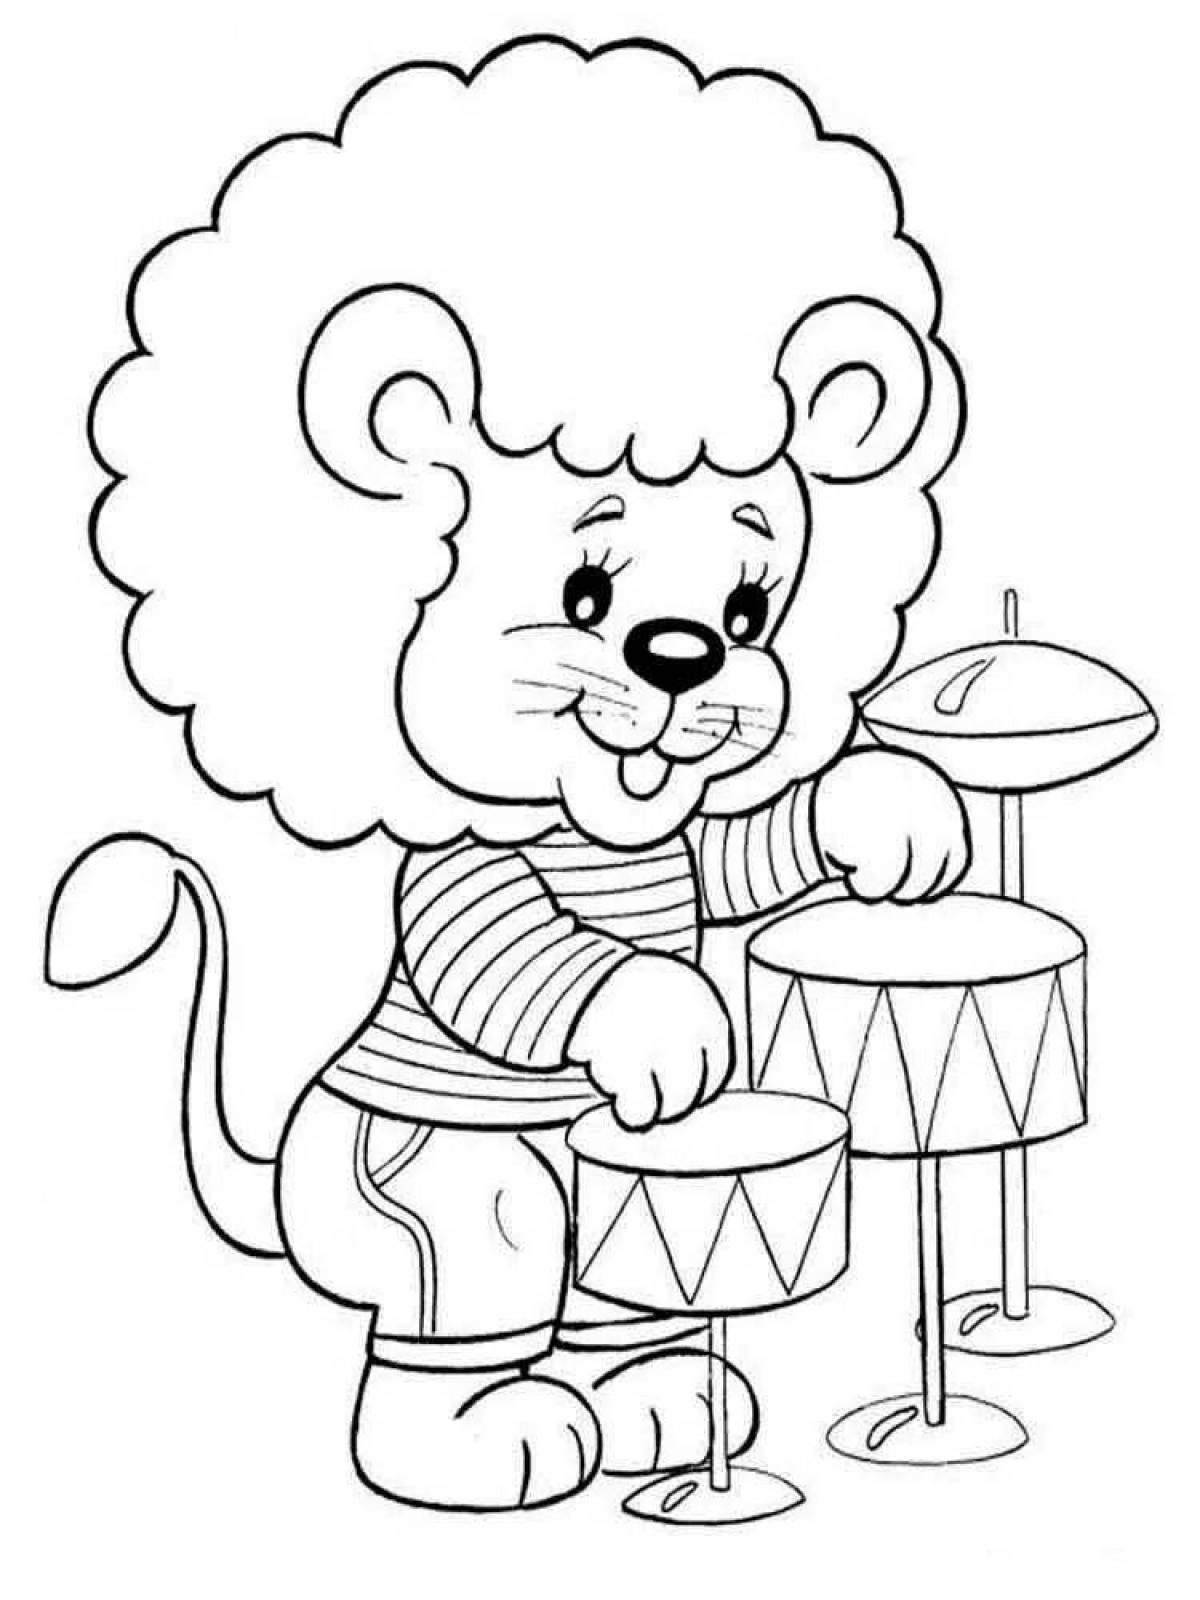 Amazing coloring pages page 5 6